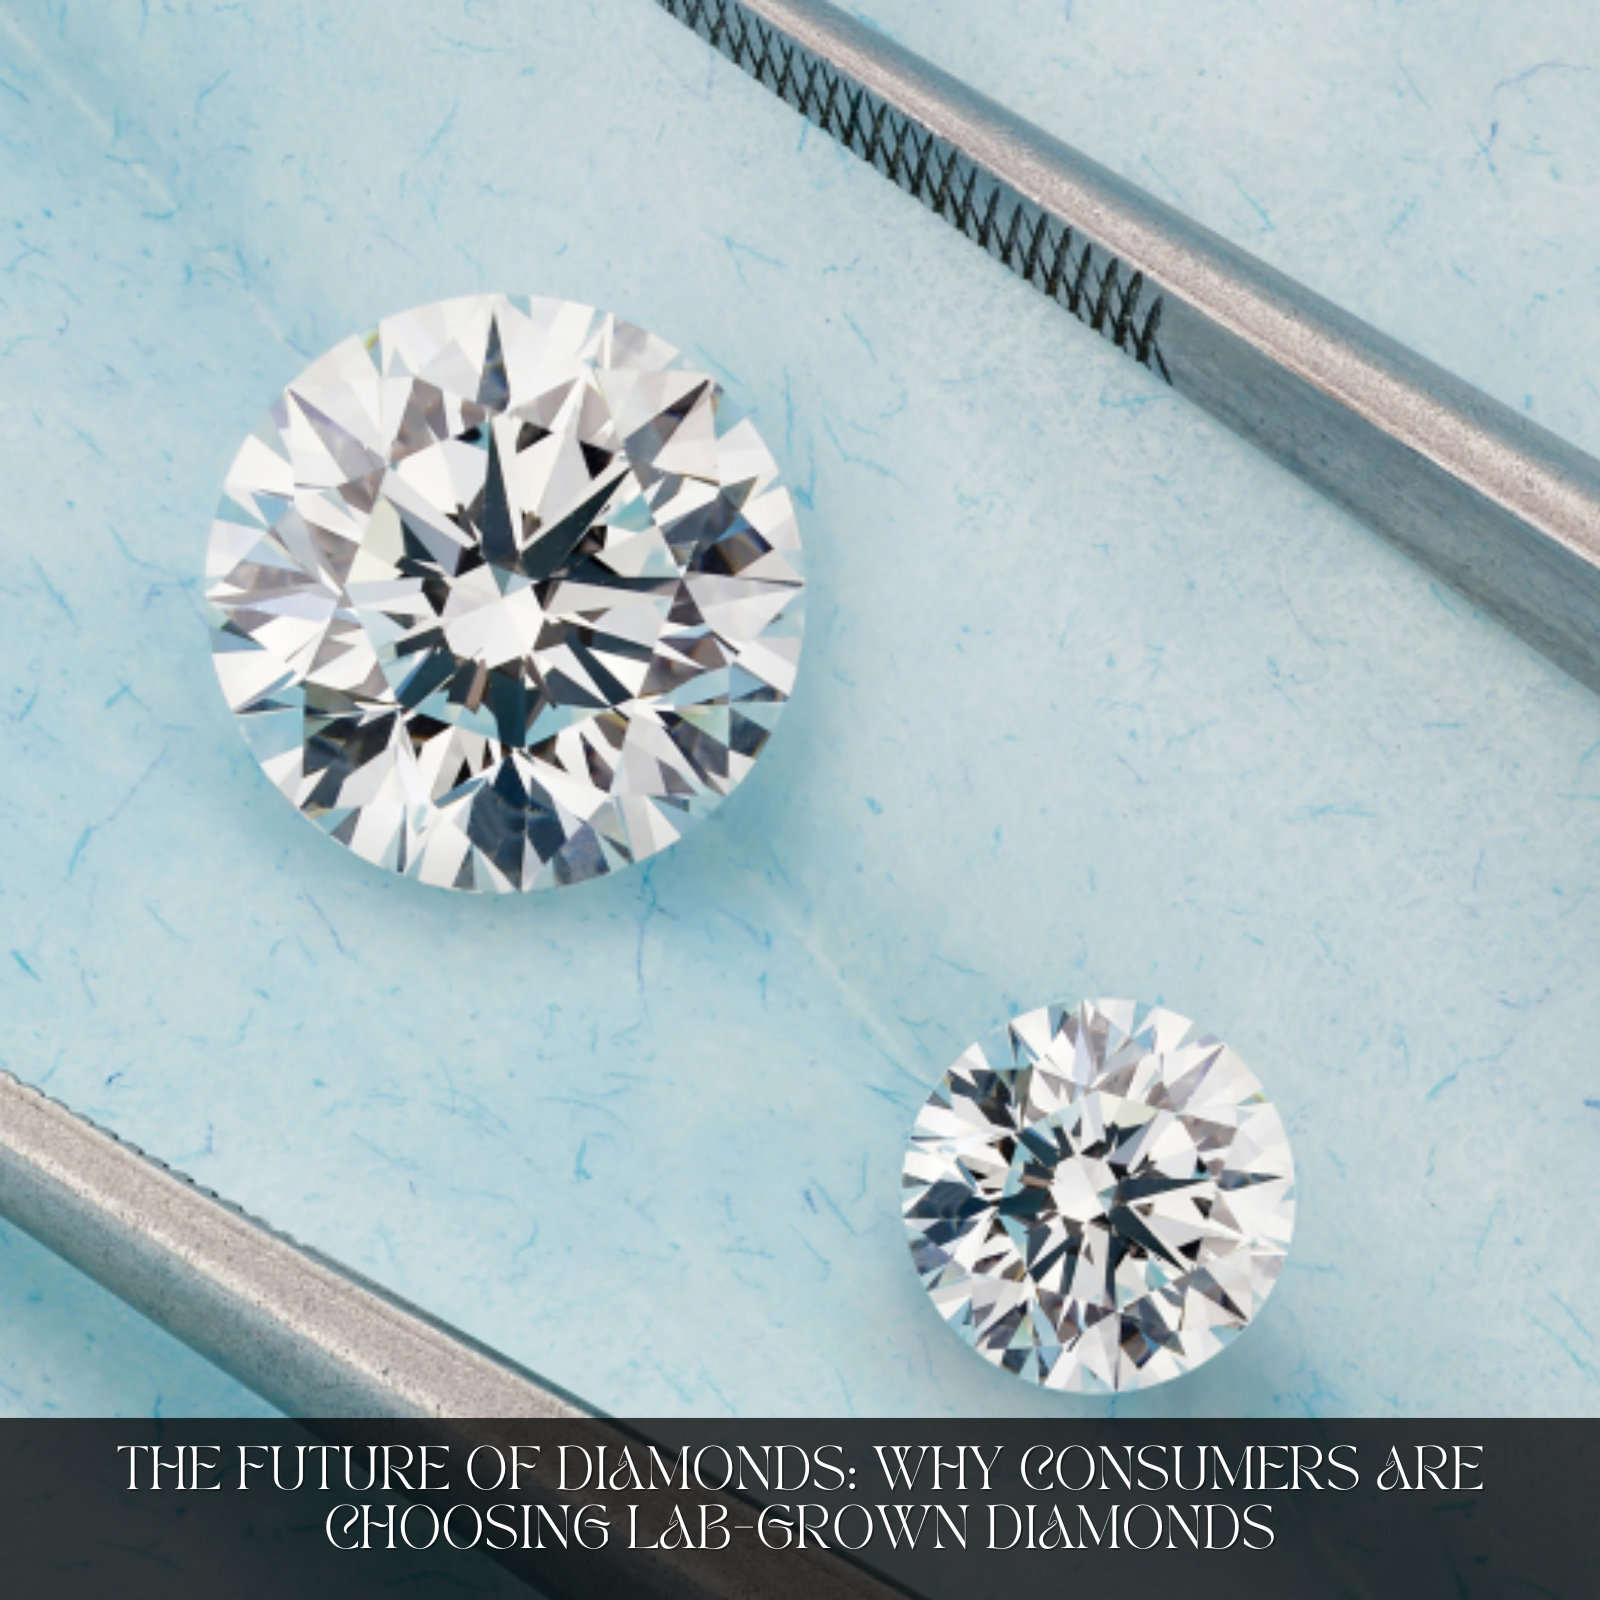 The Future of Diamonds: Why Consumers are Choosing Lab-Grown Diamonds